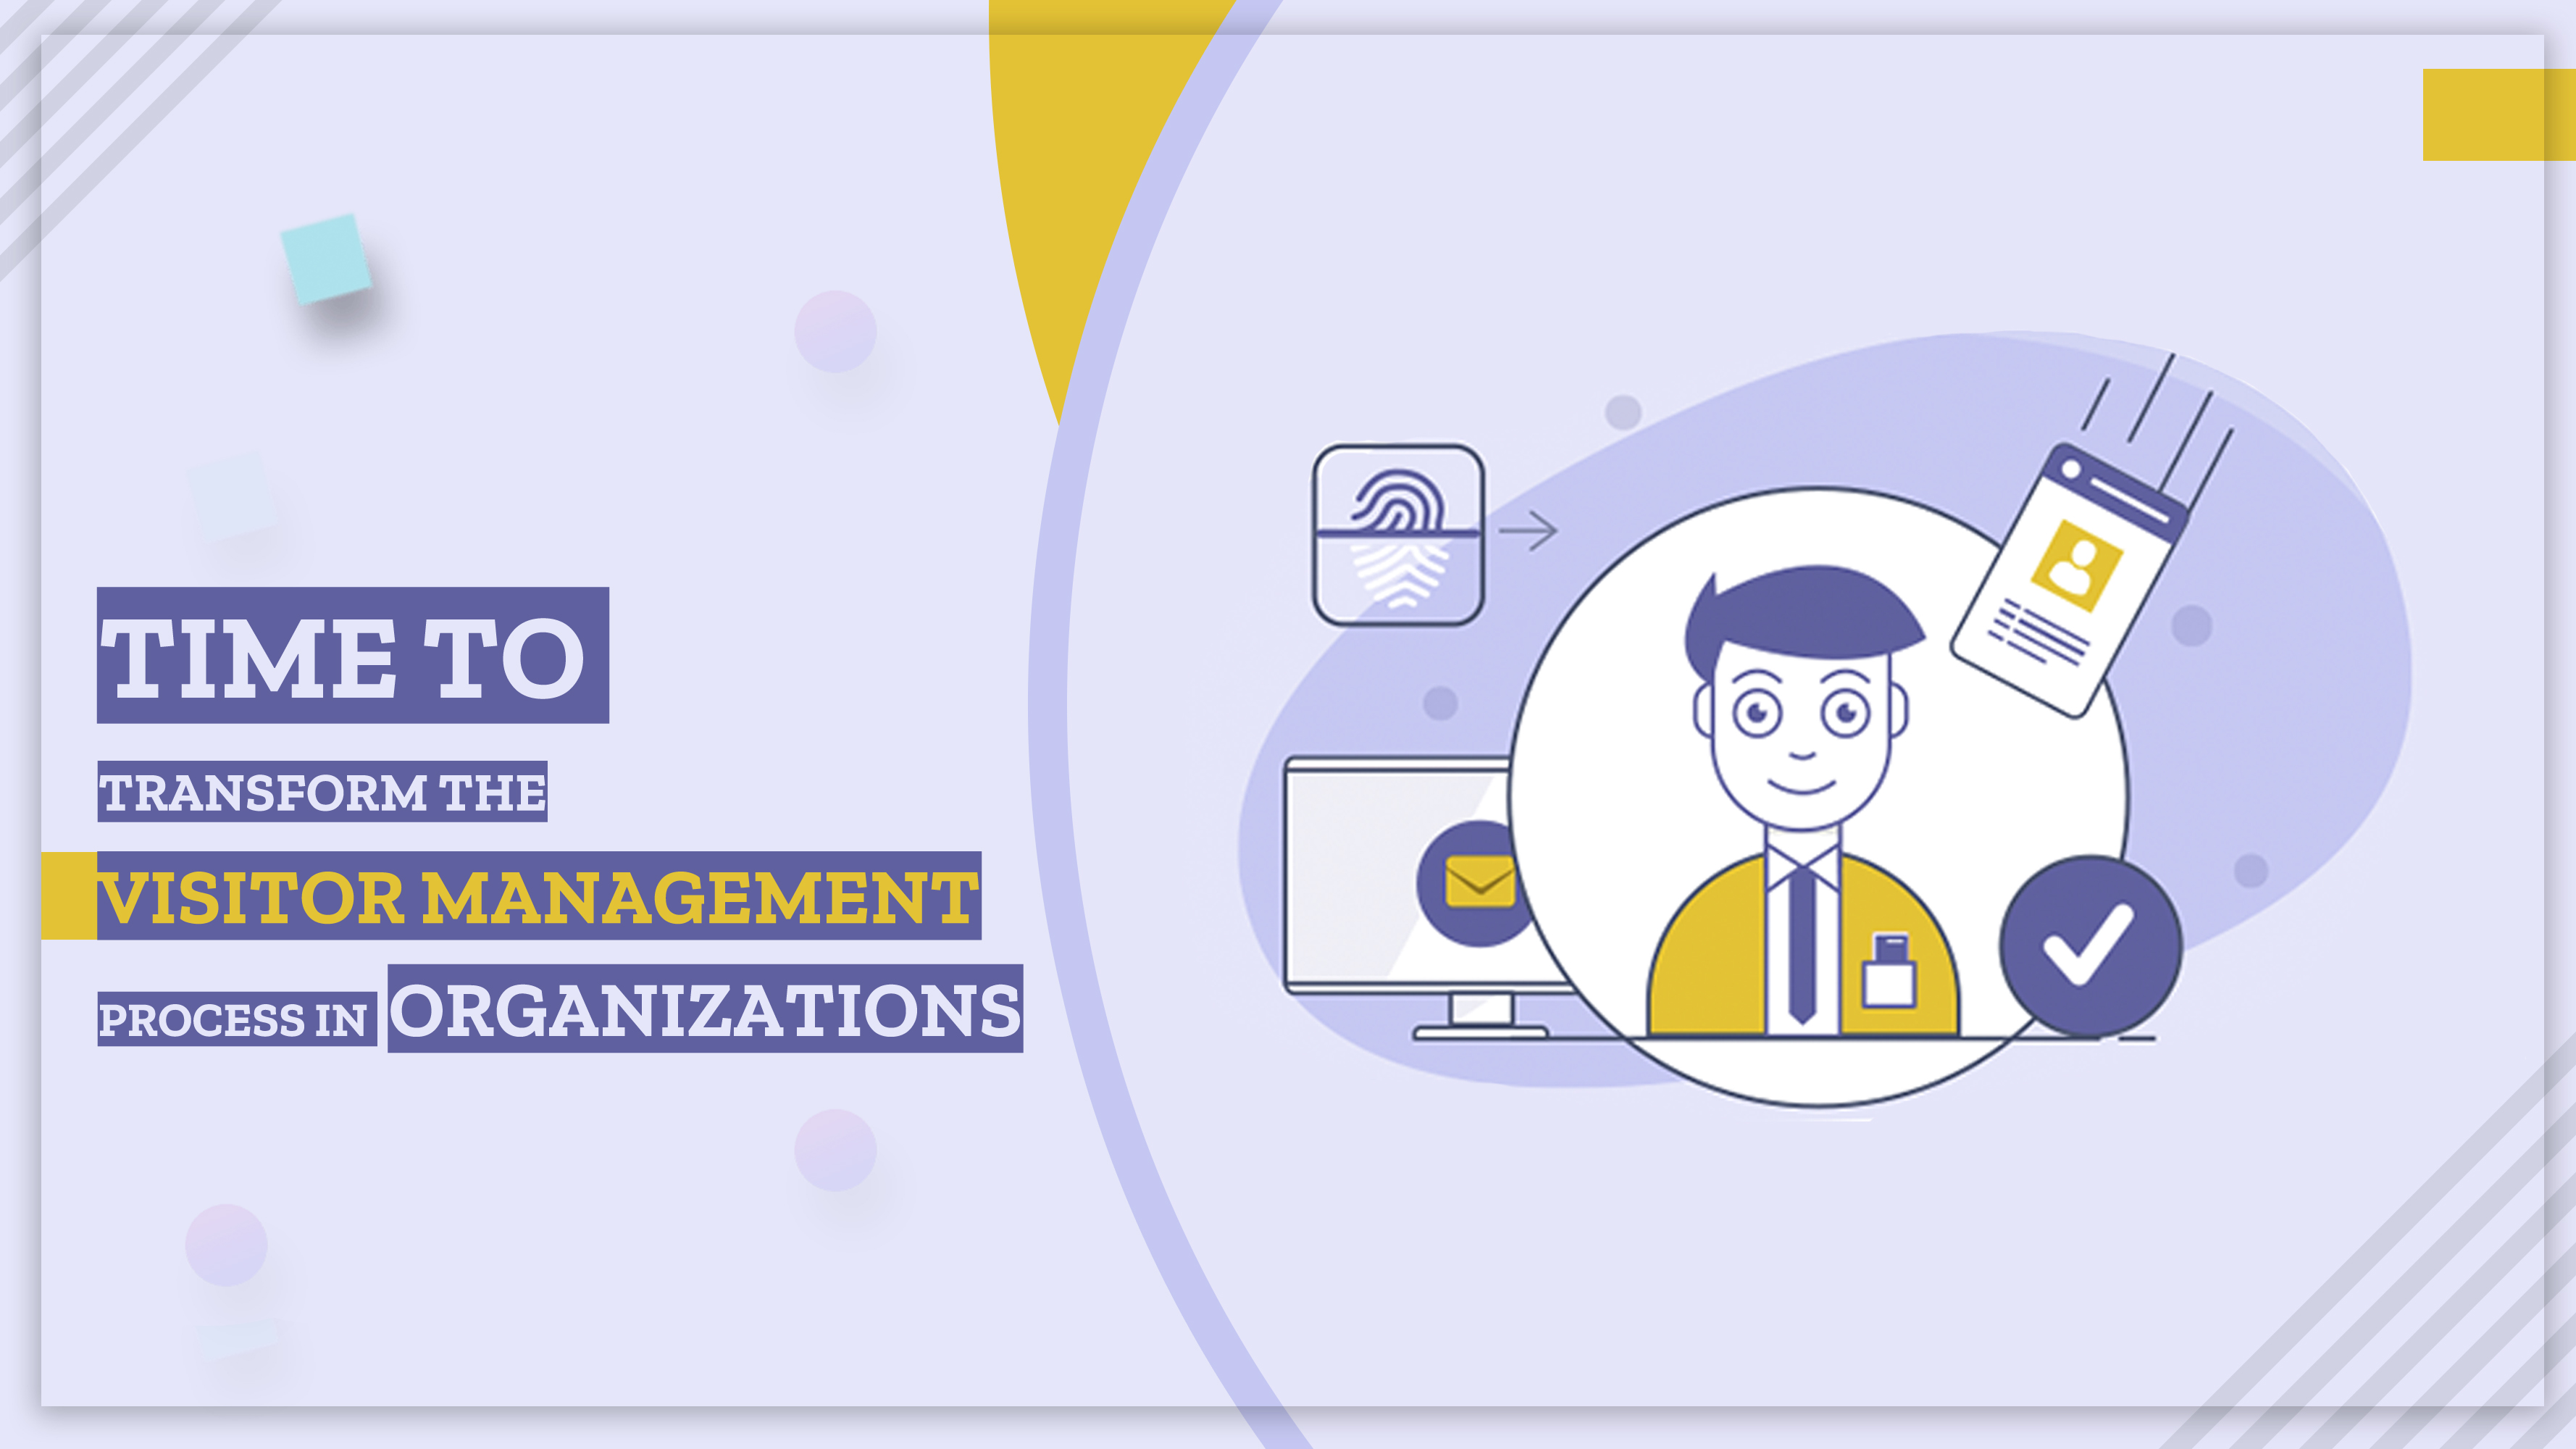 Time to Transform the Visitor Management Process in Organizations